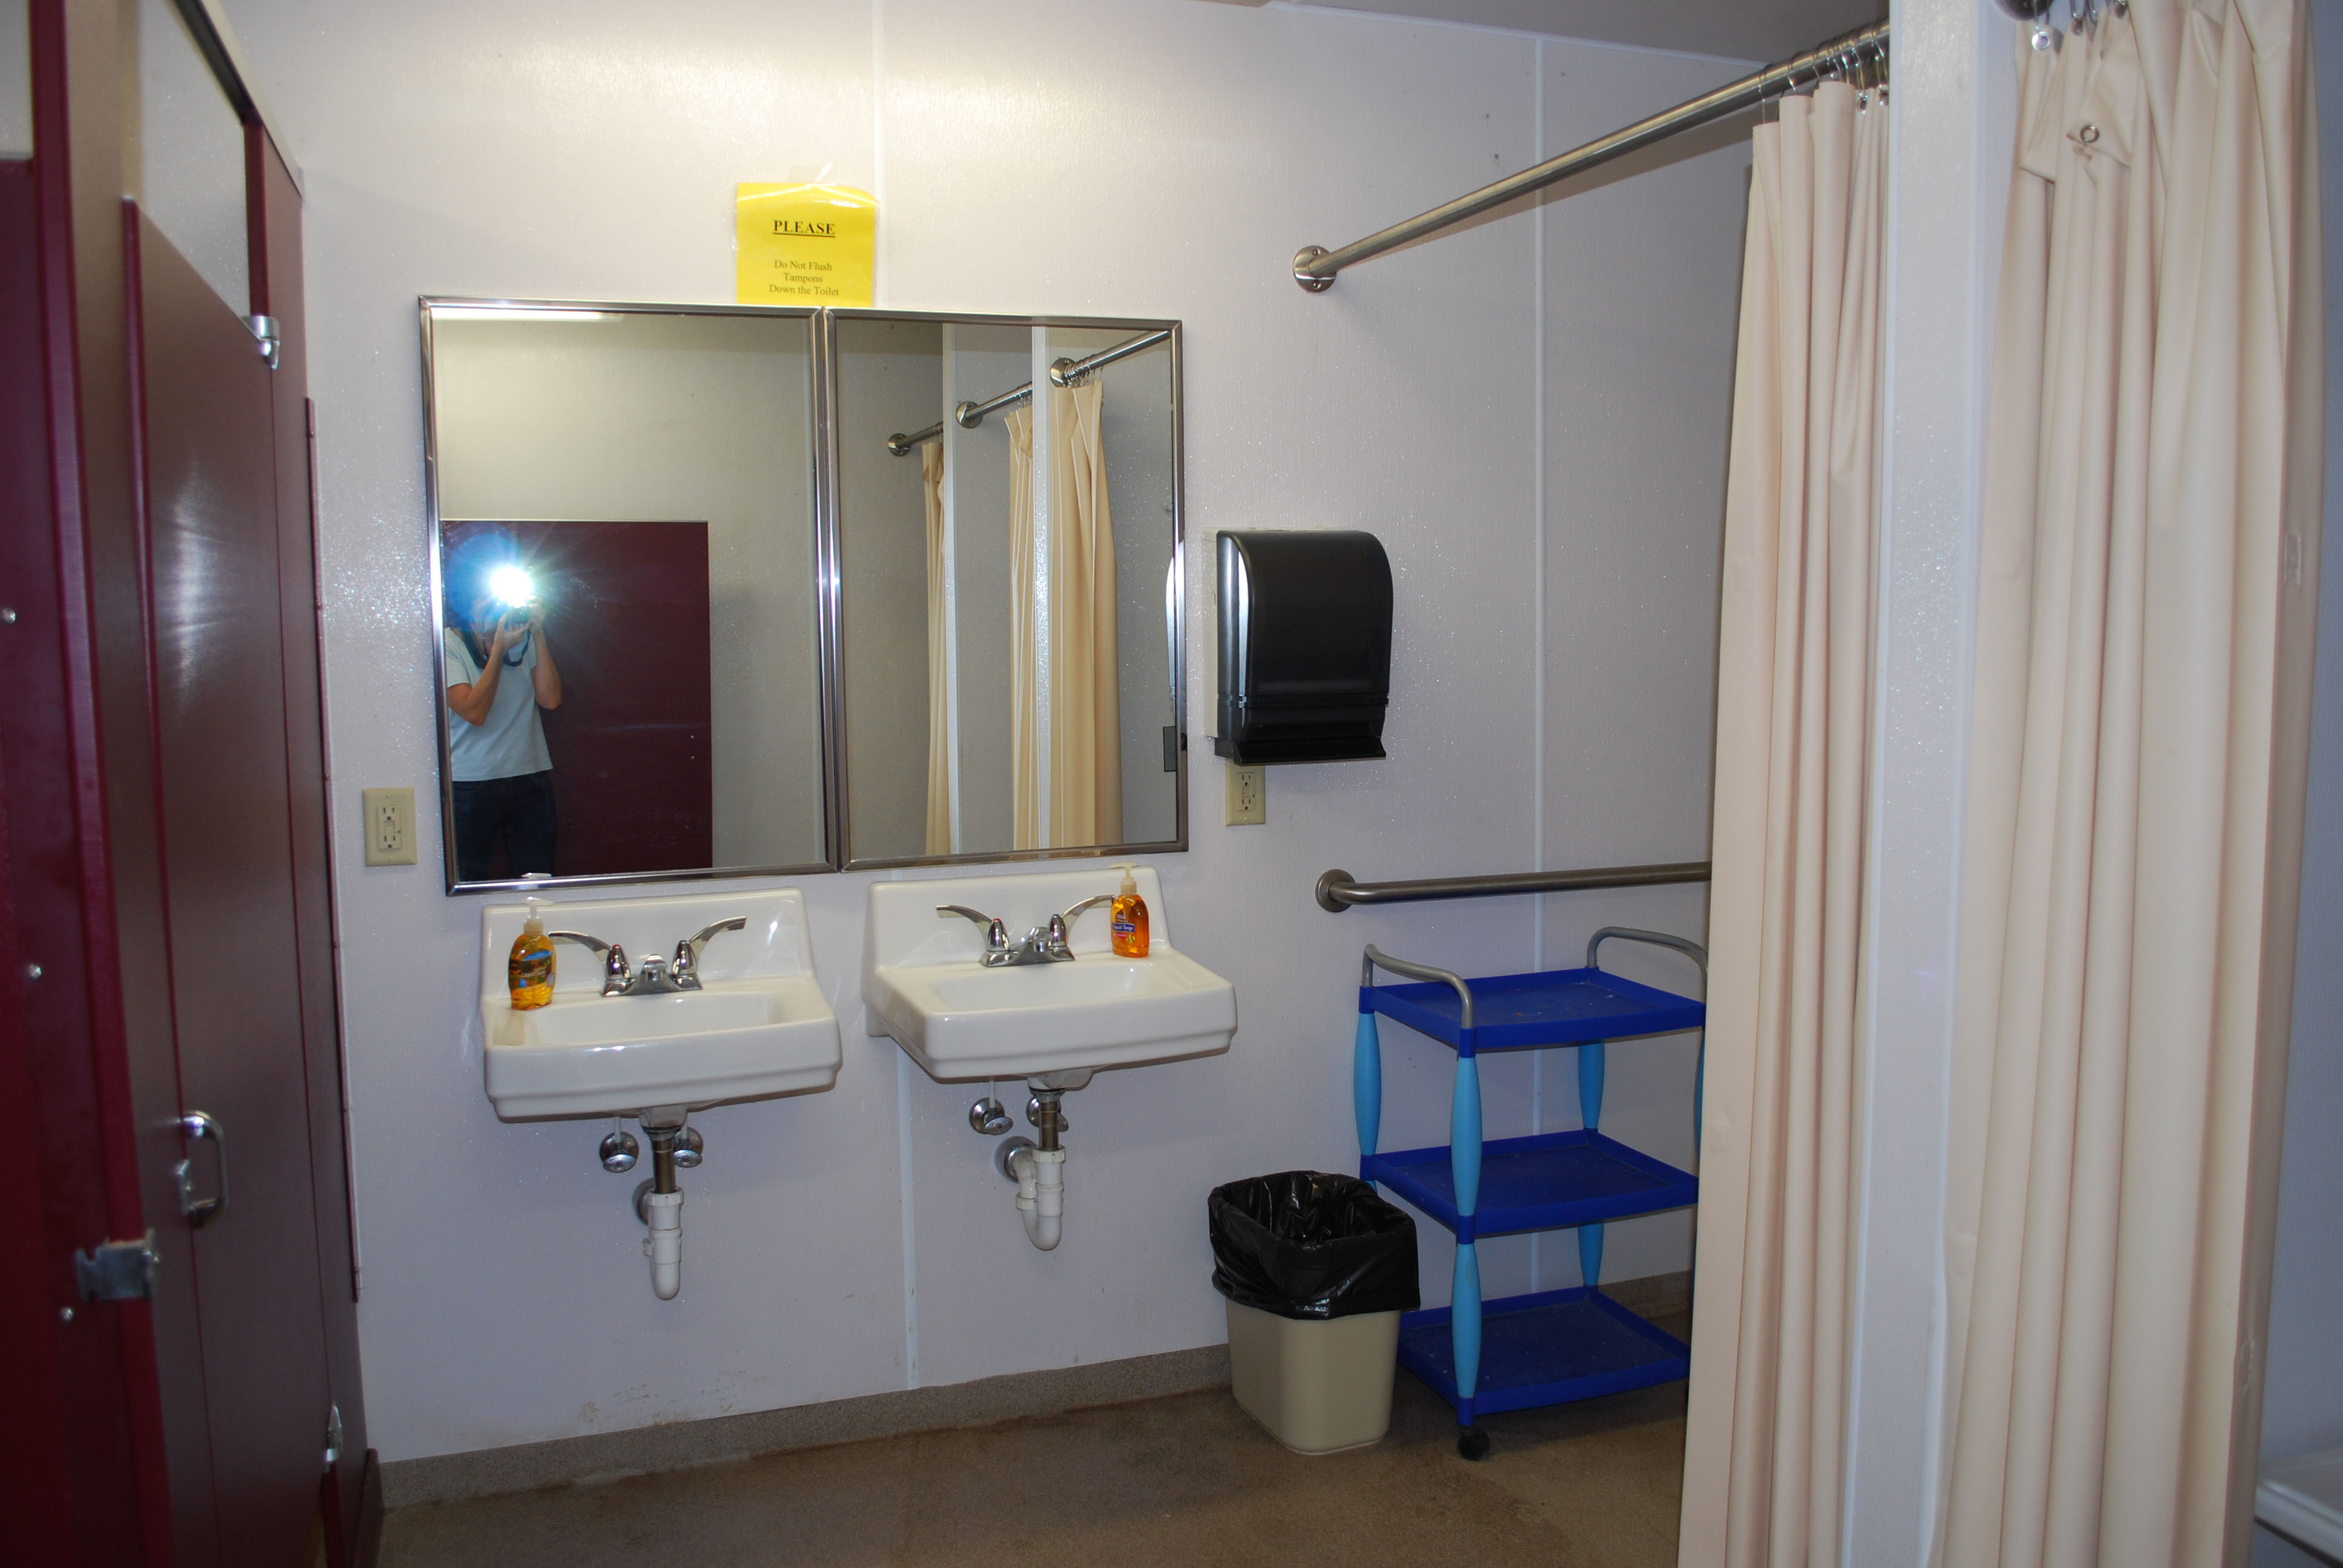 Hester restroom with sinks and mirror